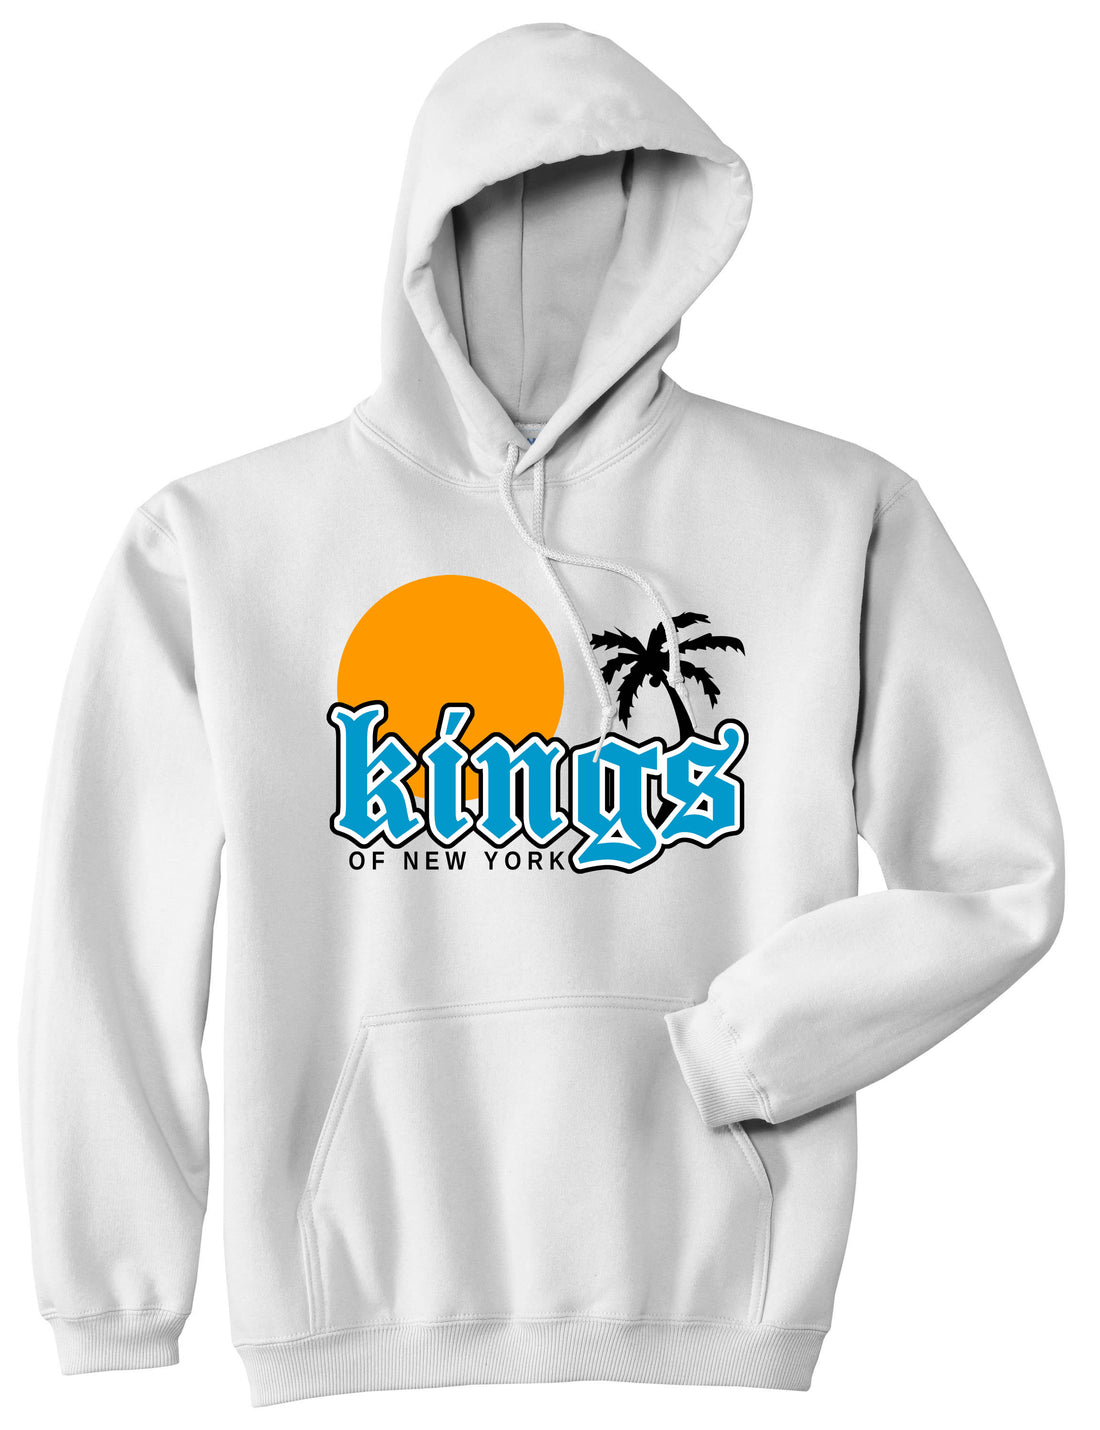 Sunsets And Palm Trees Mens Pullover Hoodie Sweatshirt White